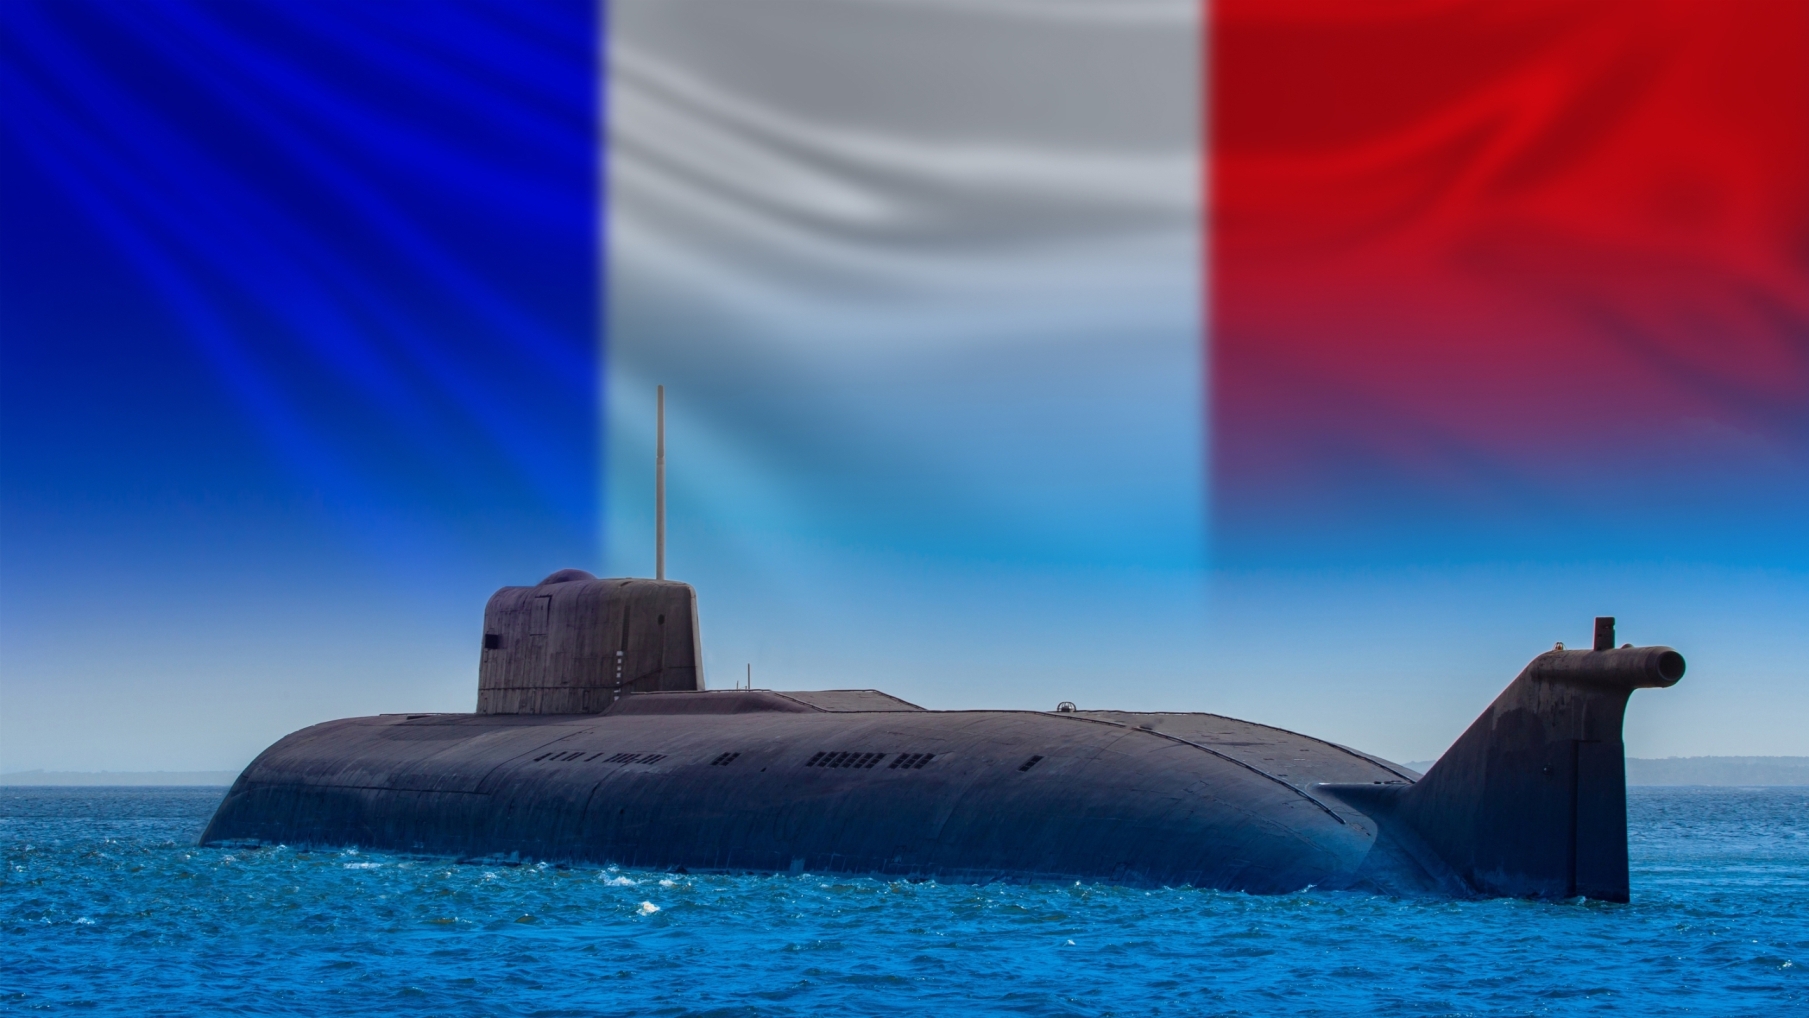 Nuclear submarine on the background of the French flag.